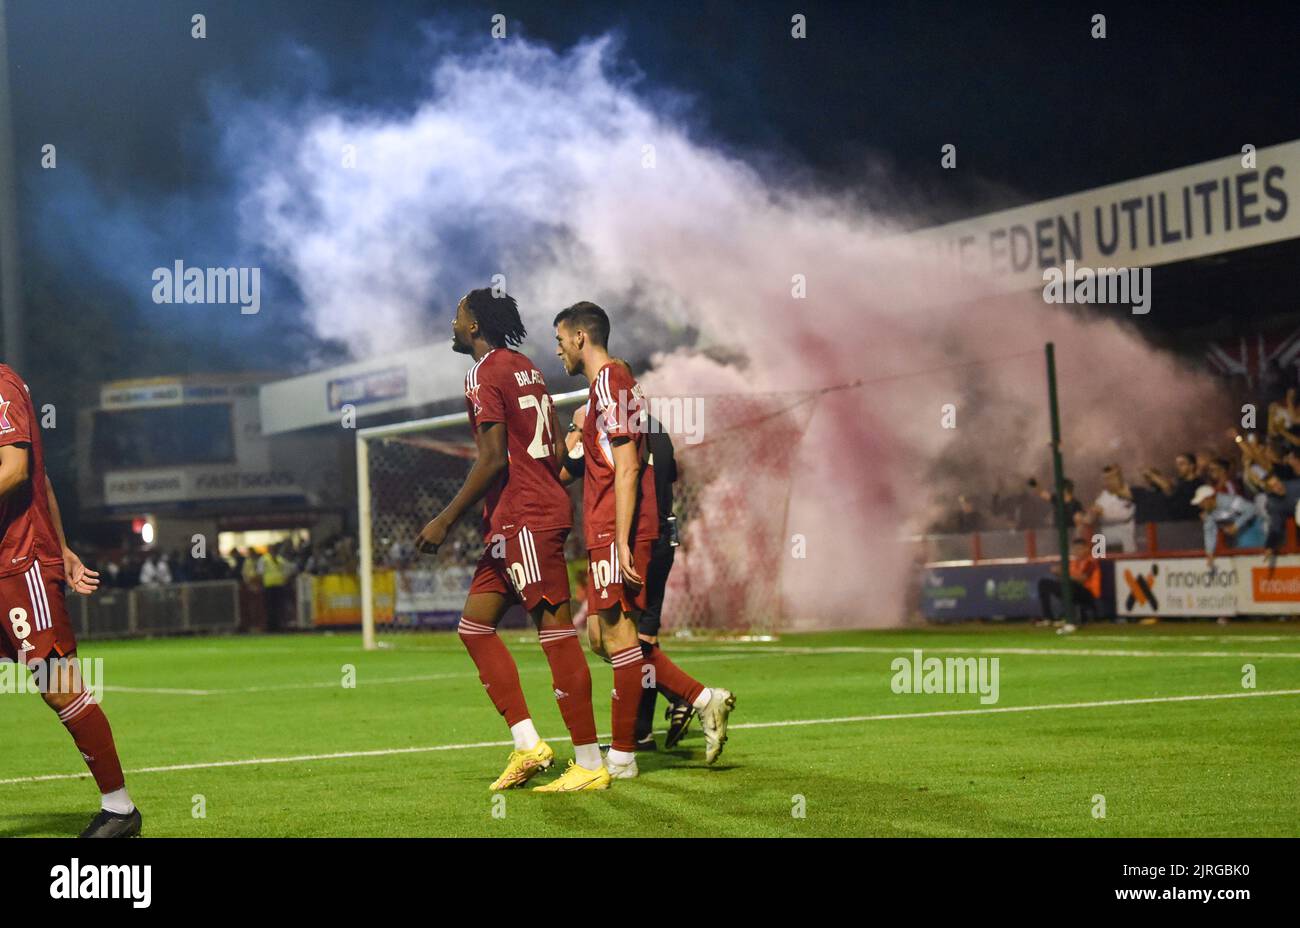 A smoke flare is let off after James Balagizi of Crawley had scored their second goal during the EFL Carabao Cup Round Two match between Crawley Town and Fulham at the Broadfield Stadium  , Crawley ,  UK - 23rd August 2022  Editorial use only. No merchandising. For Football images FA and Premier League restrictions apply inc. no internet/mobile usage without FAPL license - for details contact Football Dataco Stock Photo